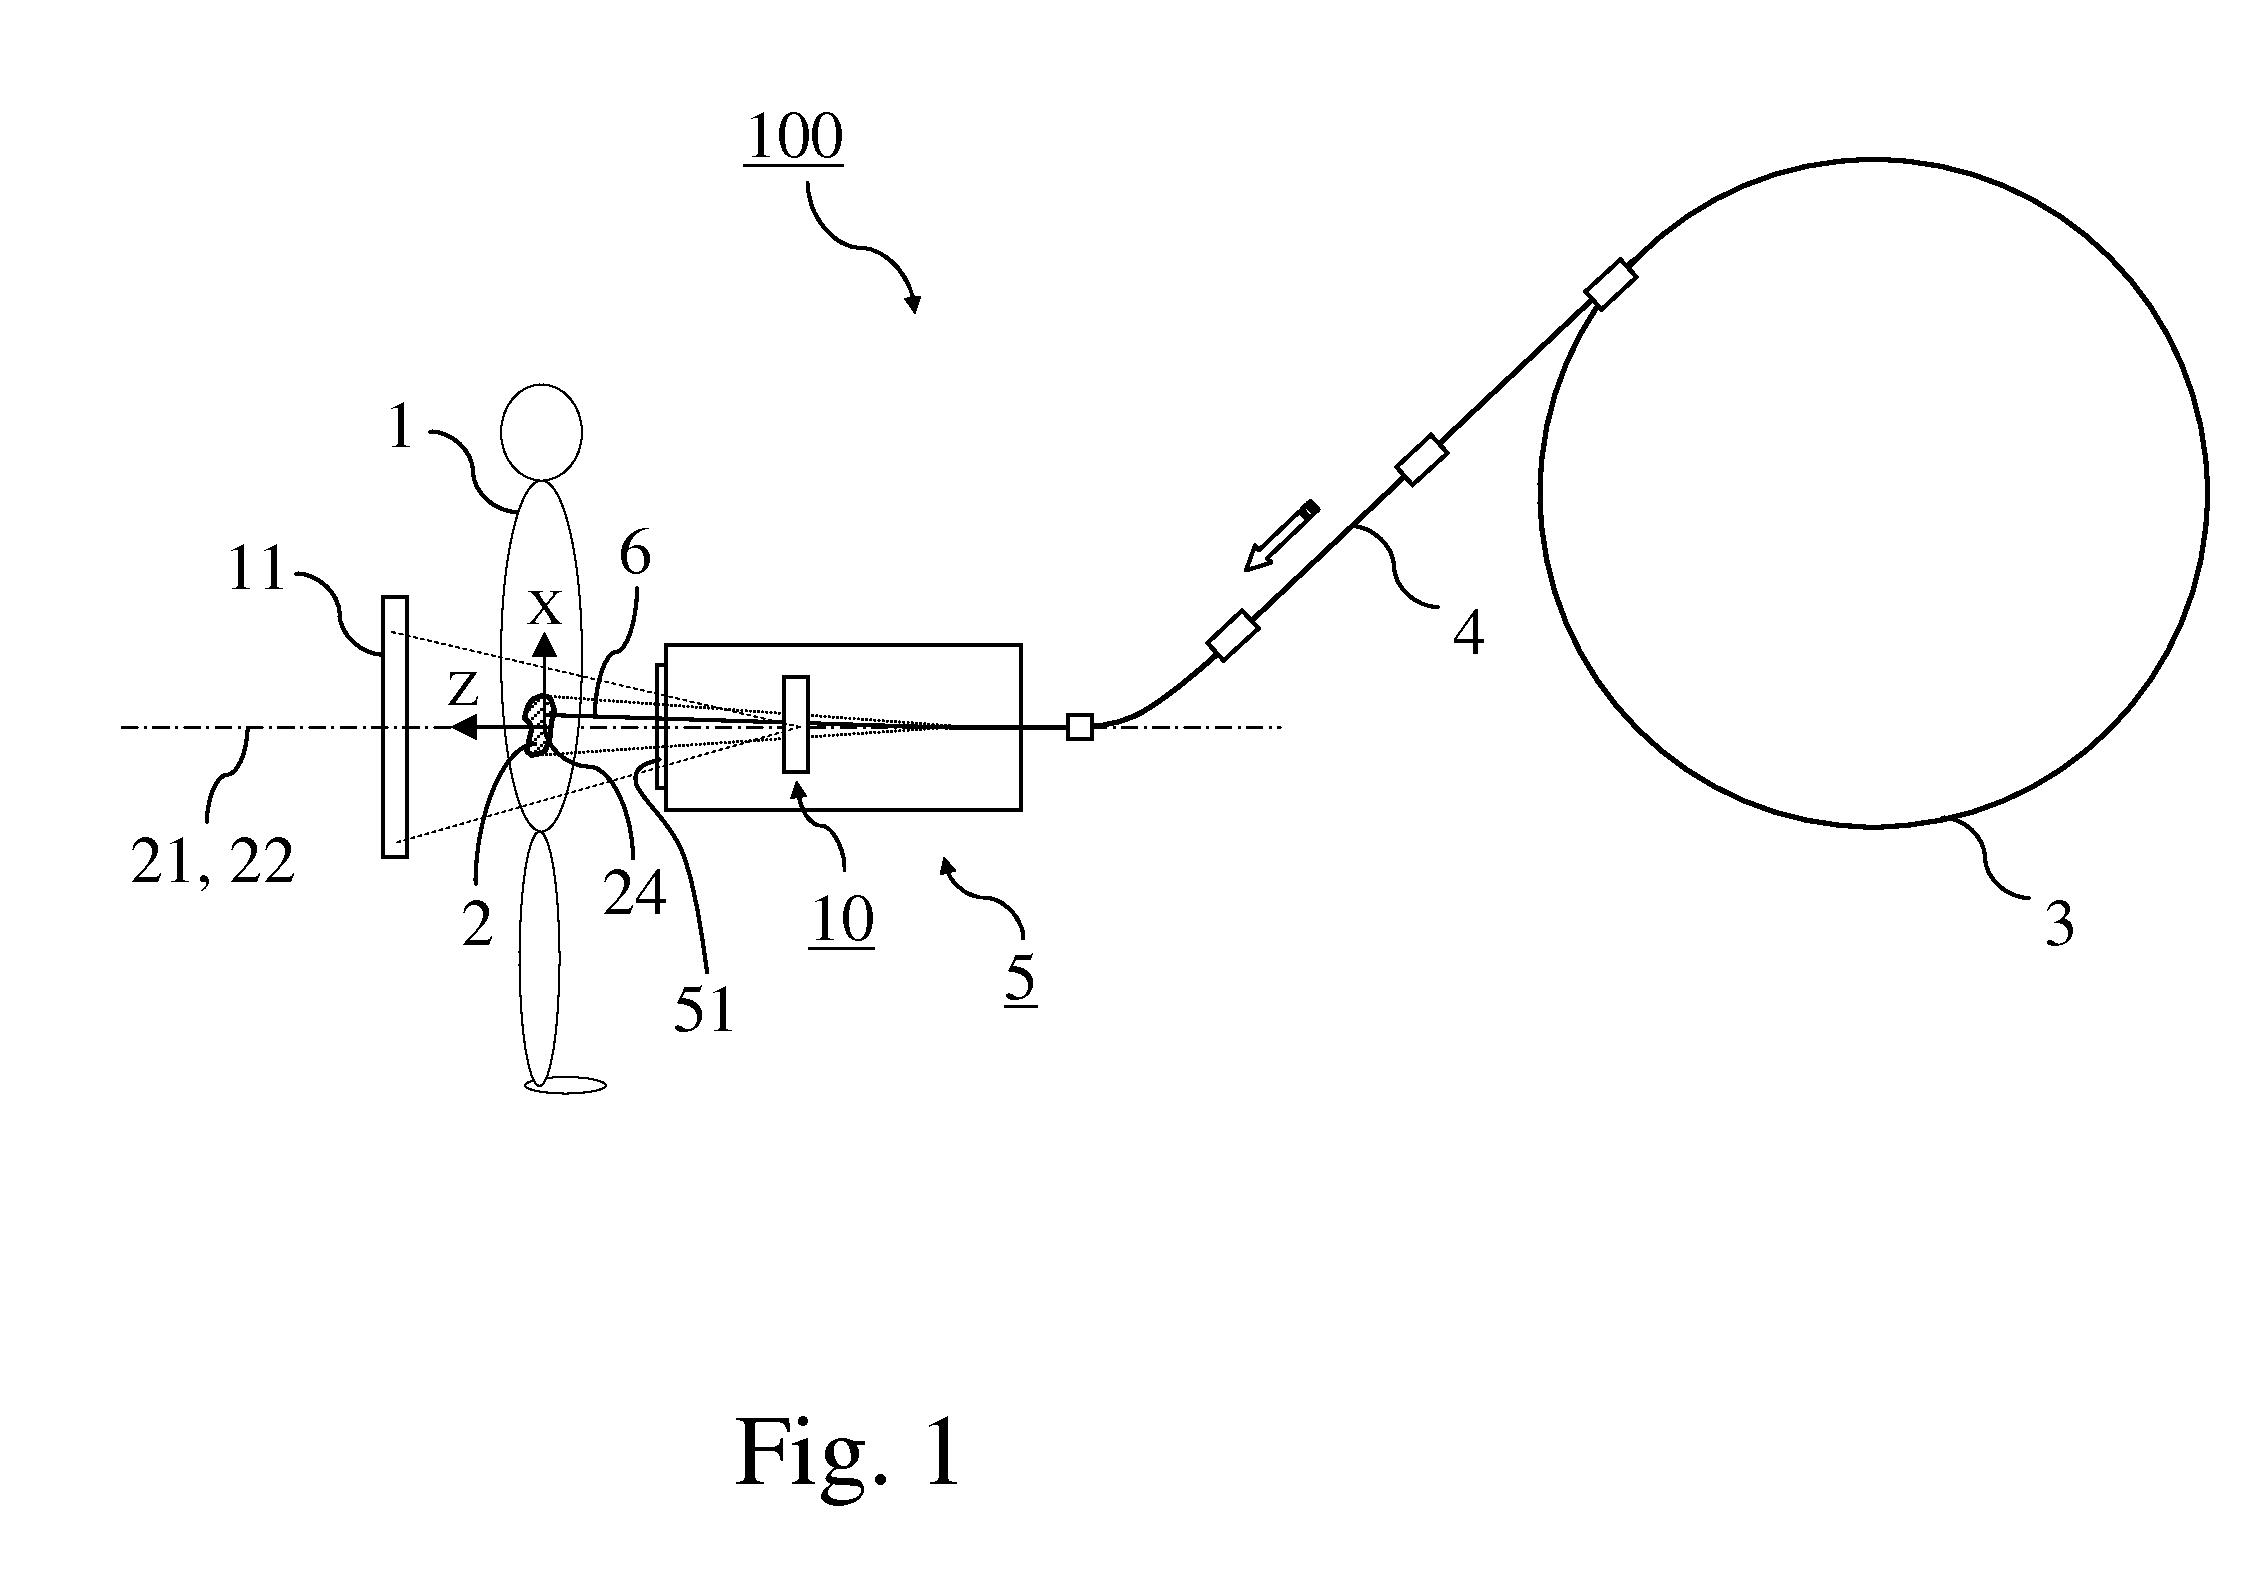 Charged particle beam therapy system having an x-ray imaging device